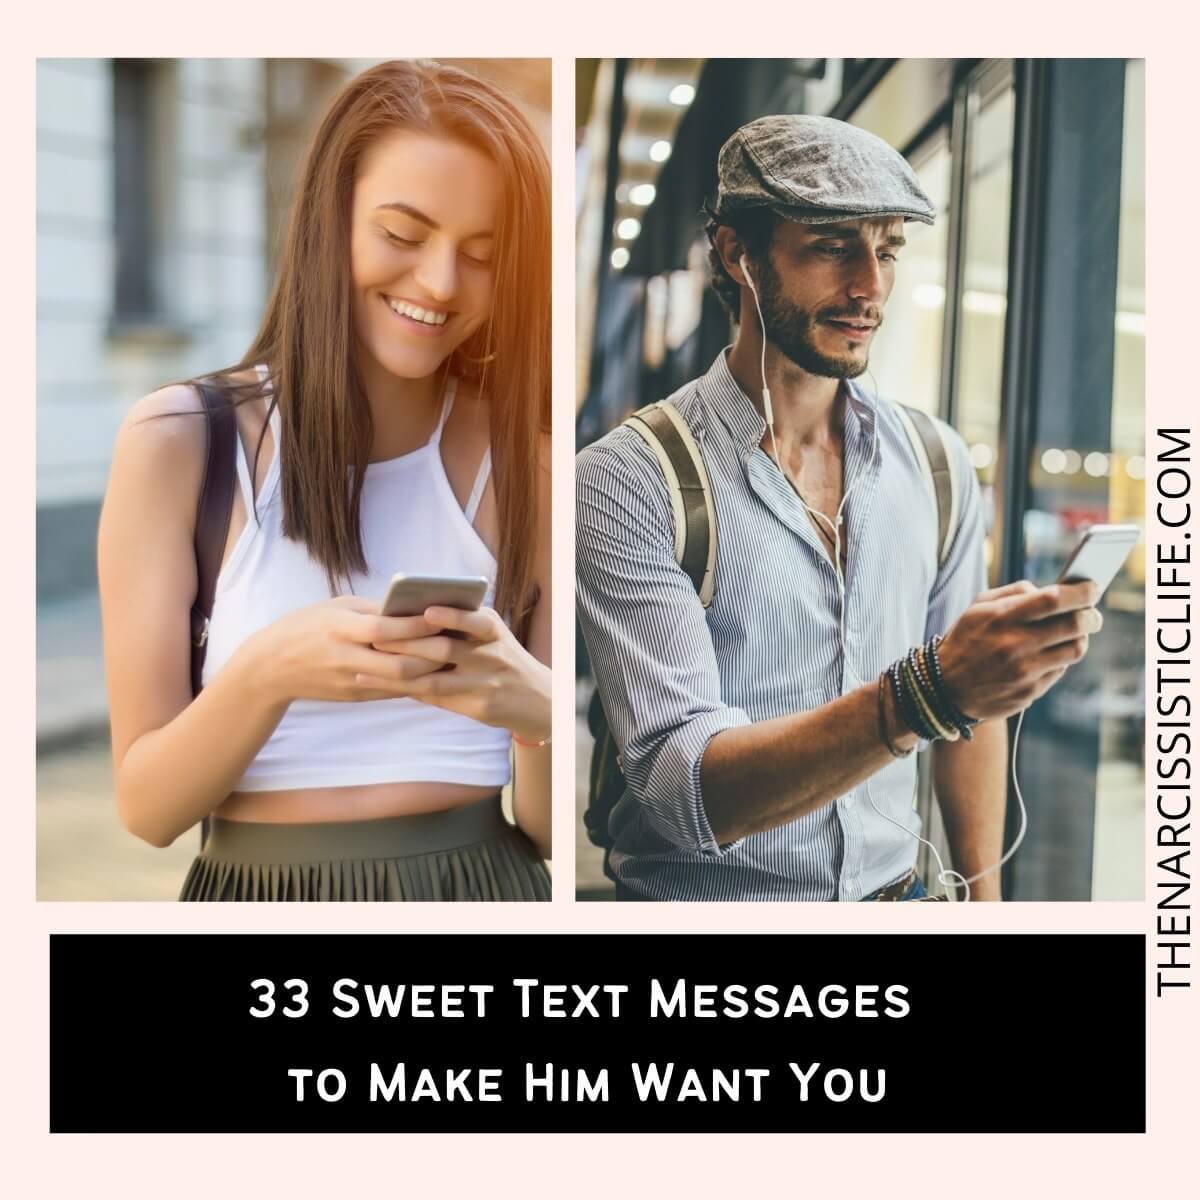 33 Sweet Text Messages to Make Him Want You.